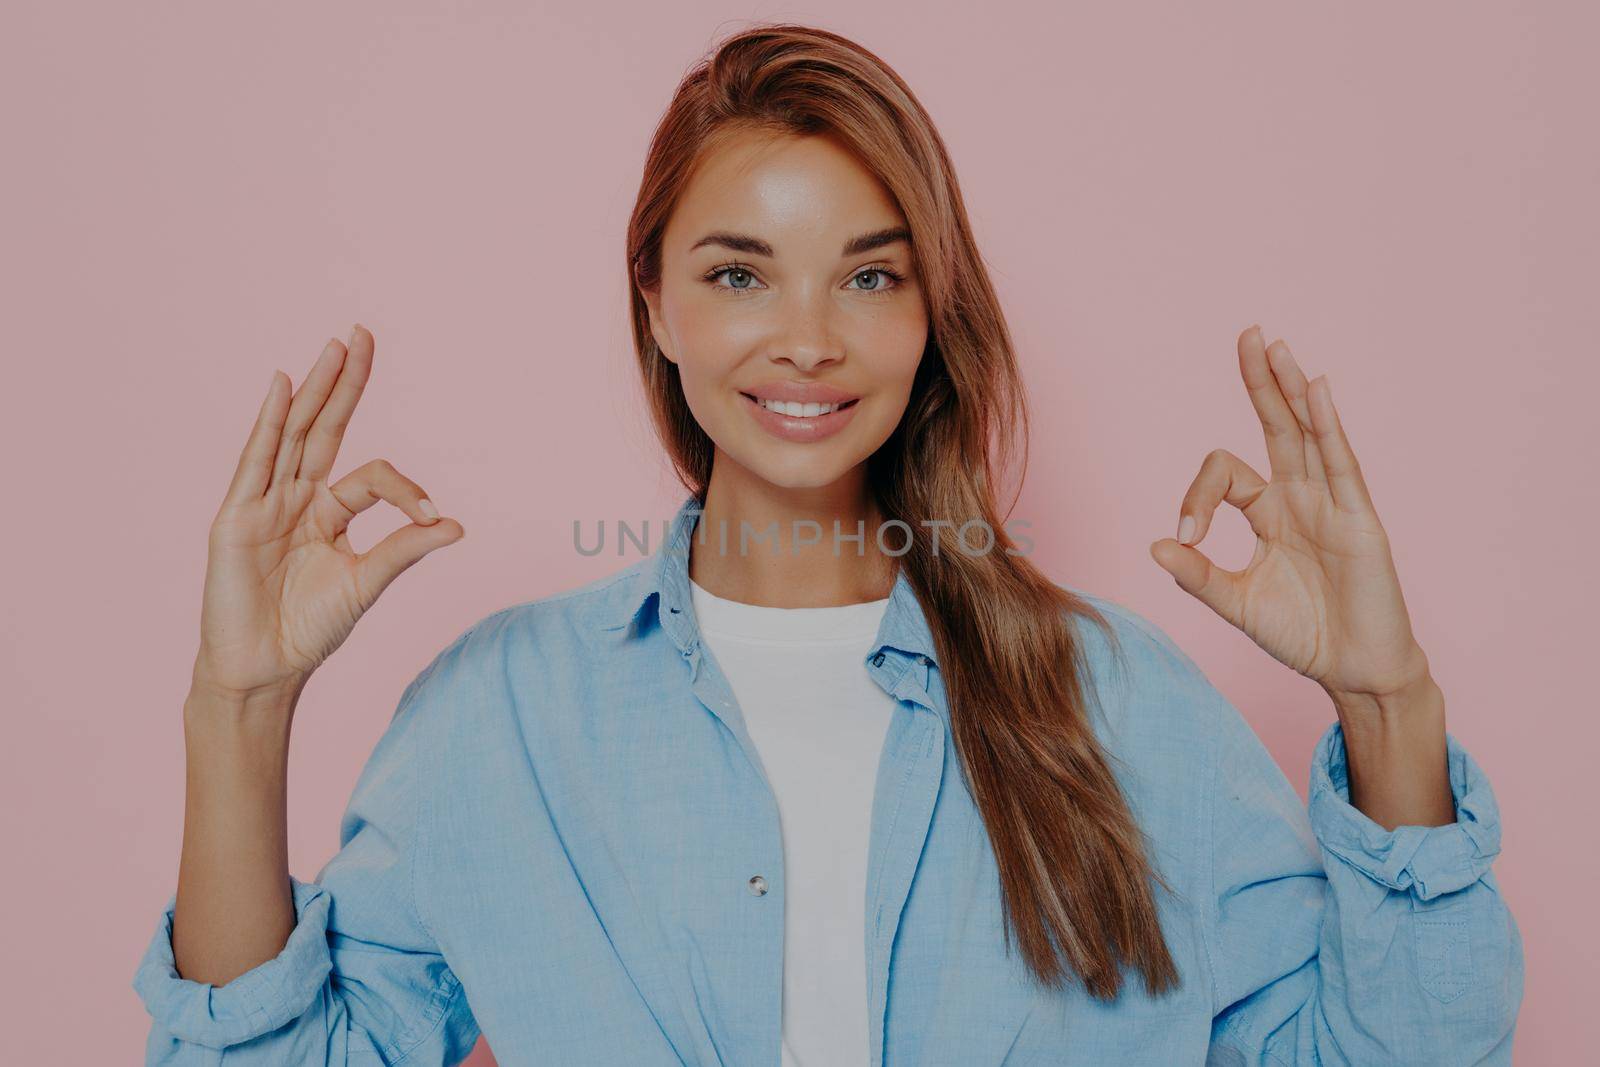 Happy young woman showing okay gesture with both hands and demonstrating aproval, looking at camera with cheerful smile, posing against pink background in stylish outfit. Body language concept